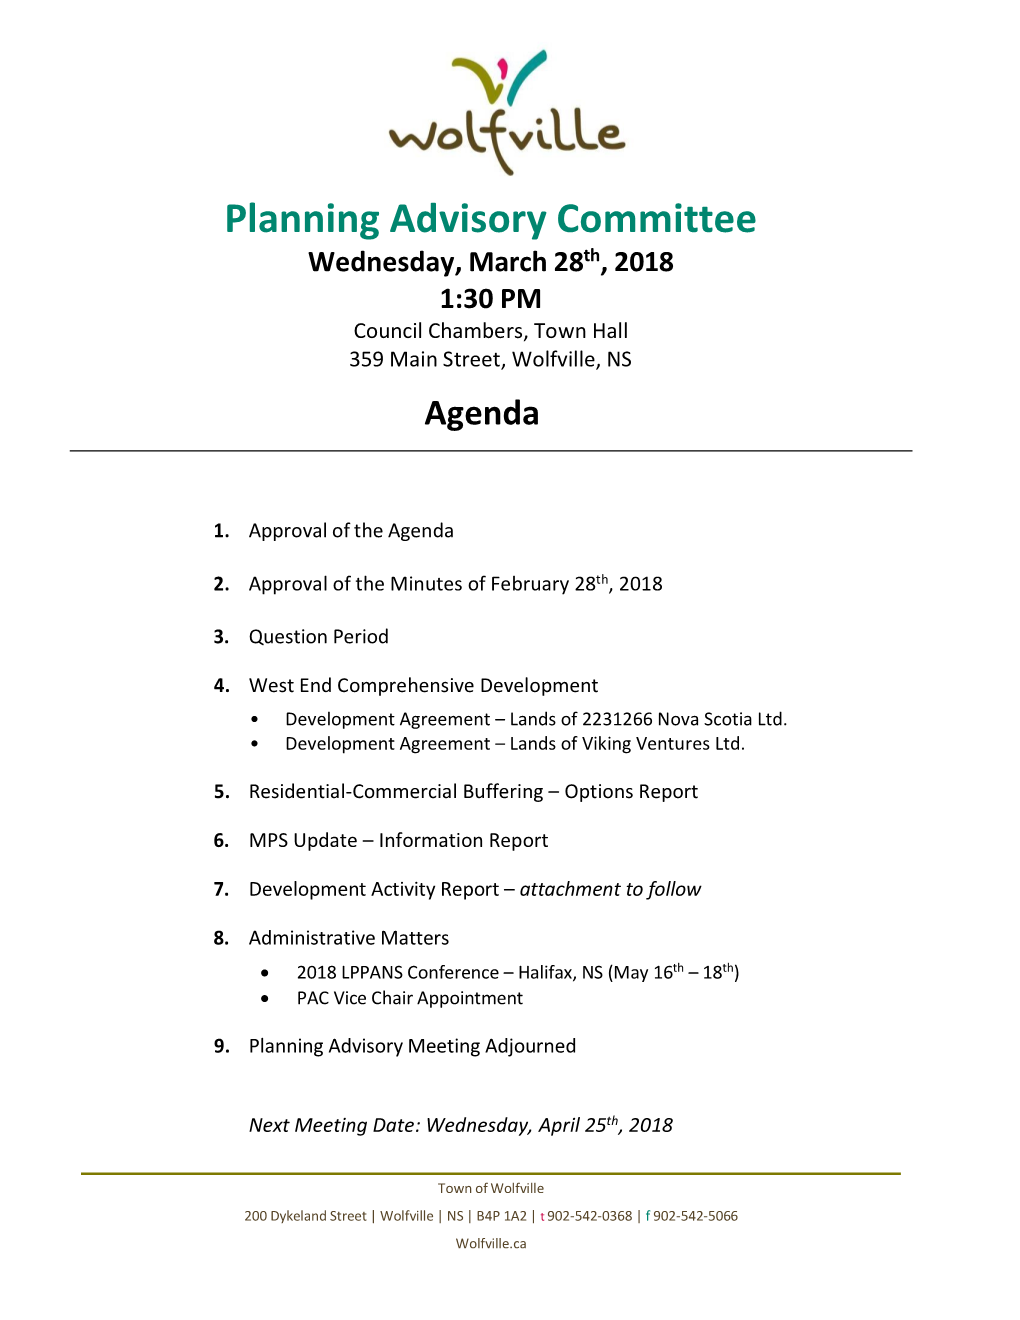 Planning Advisory Committee Wednesday, March 28Th, 2018 1:30 PM Council Chambers, Town Hall 359 Main Street, Wolfville, NS